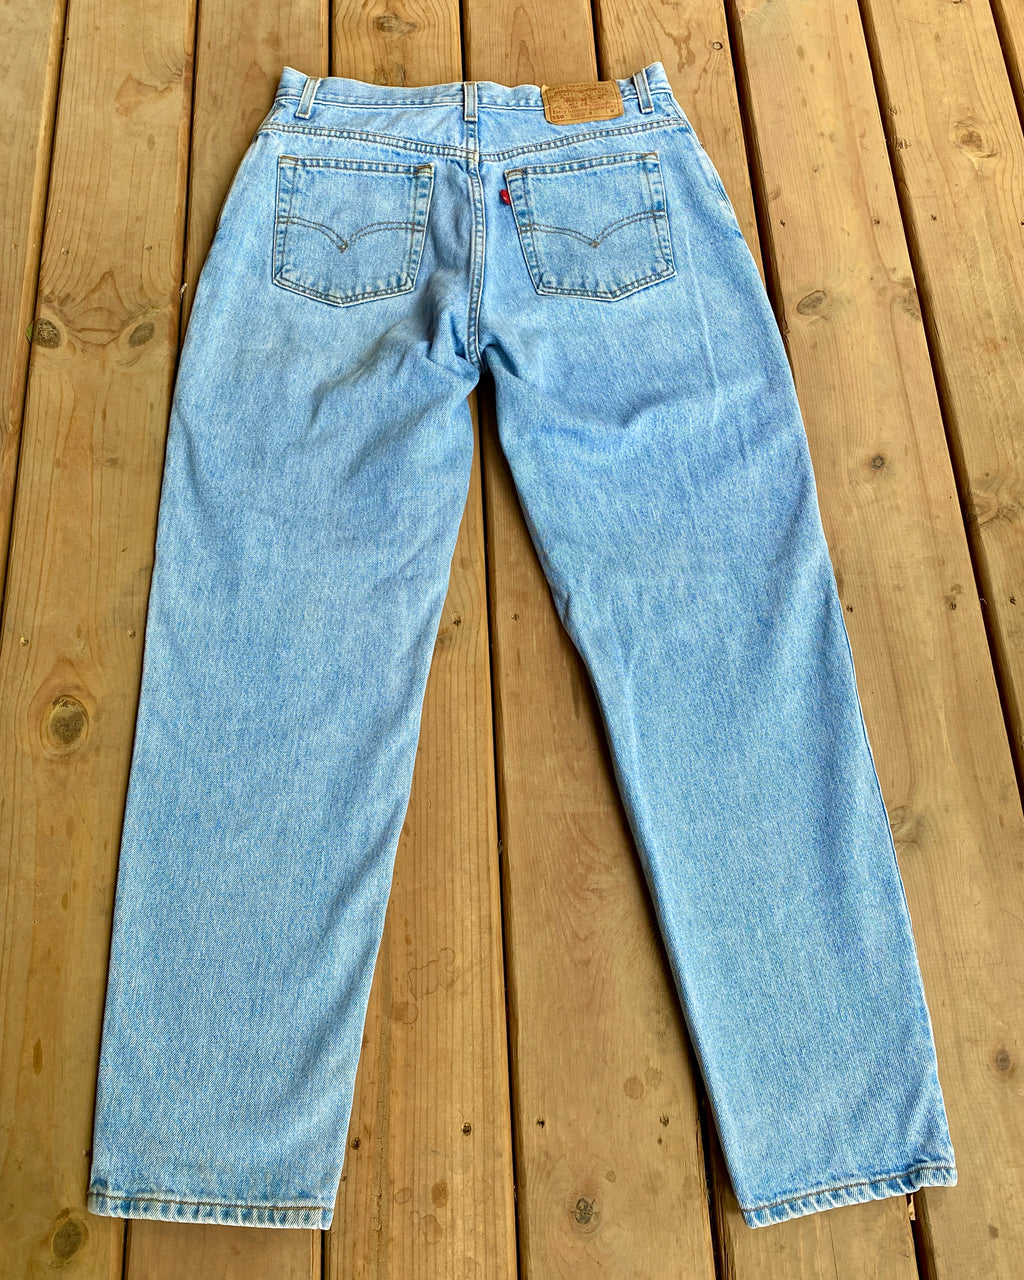 Vintage 1990s Levis 550 Relaxed Fit Light Wash Jeans size 32